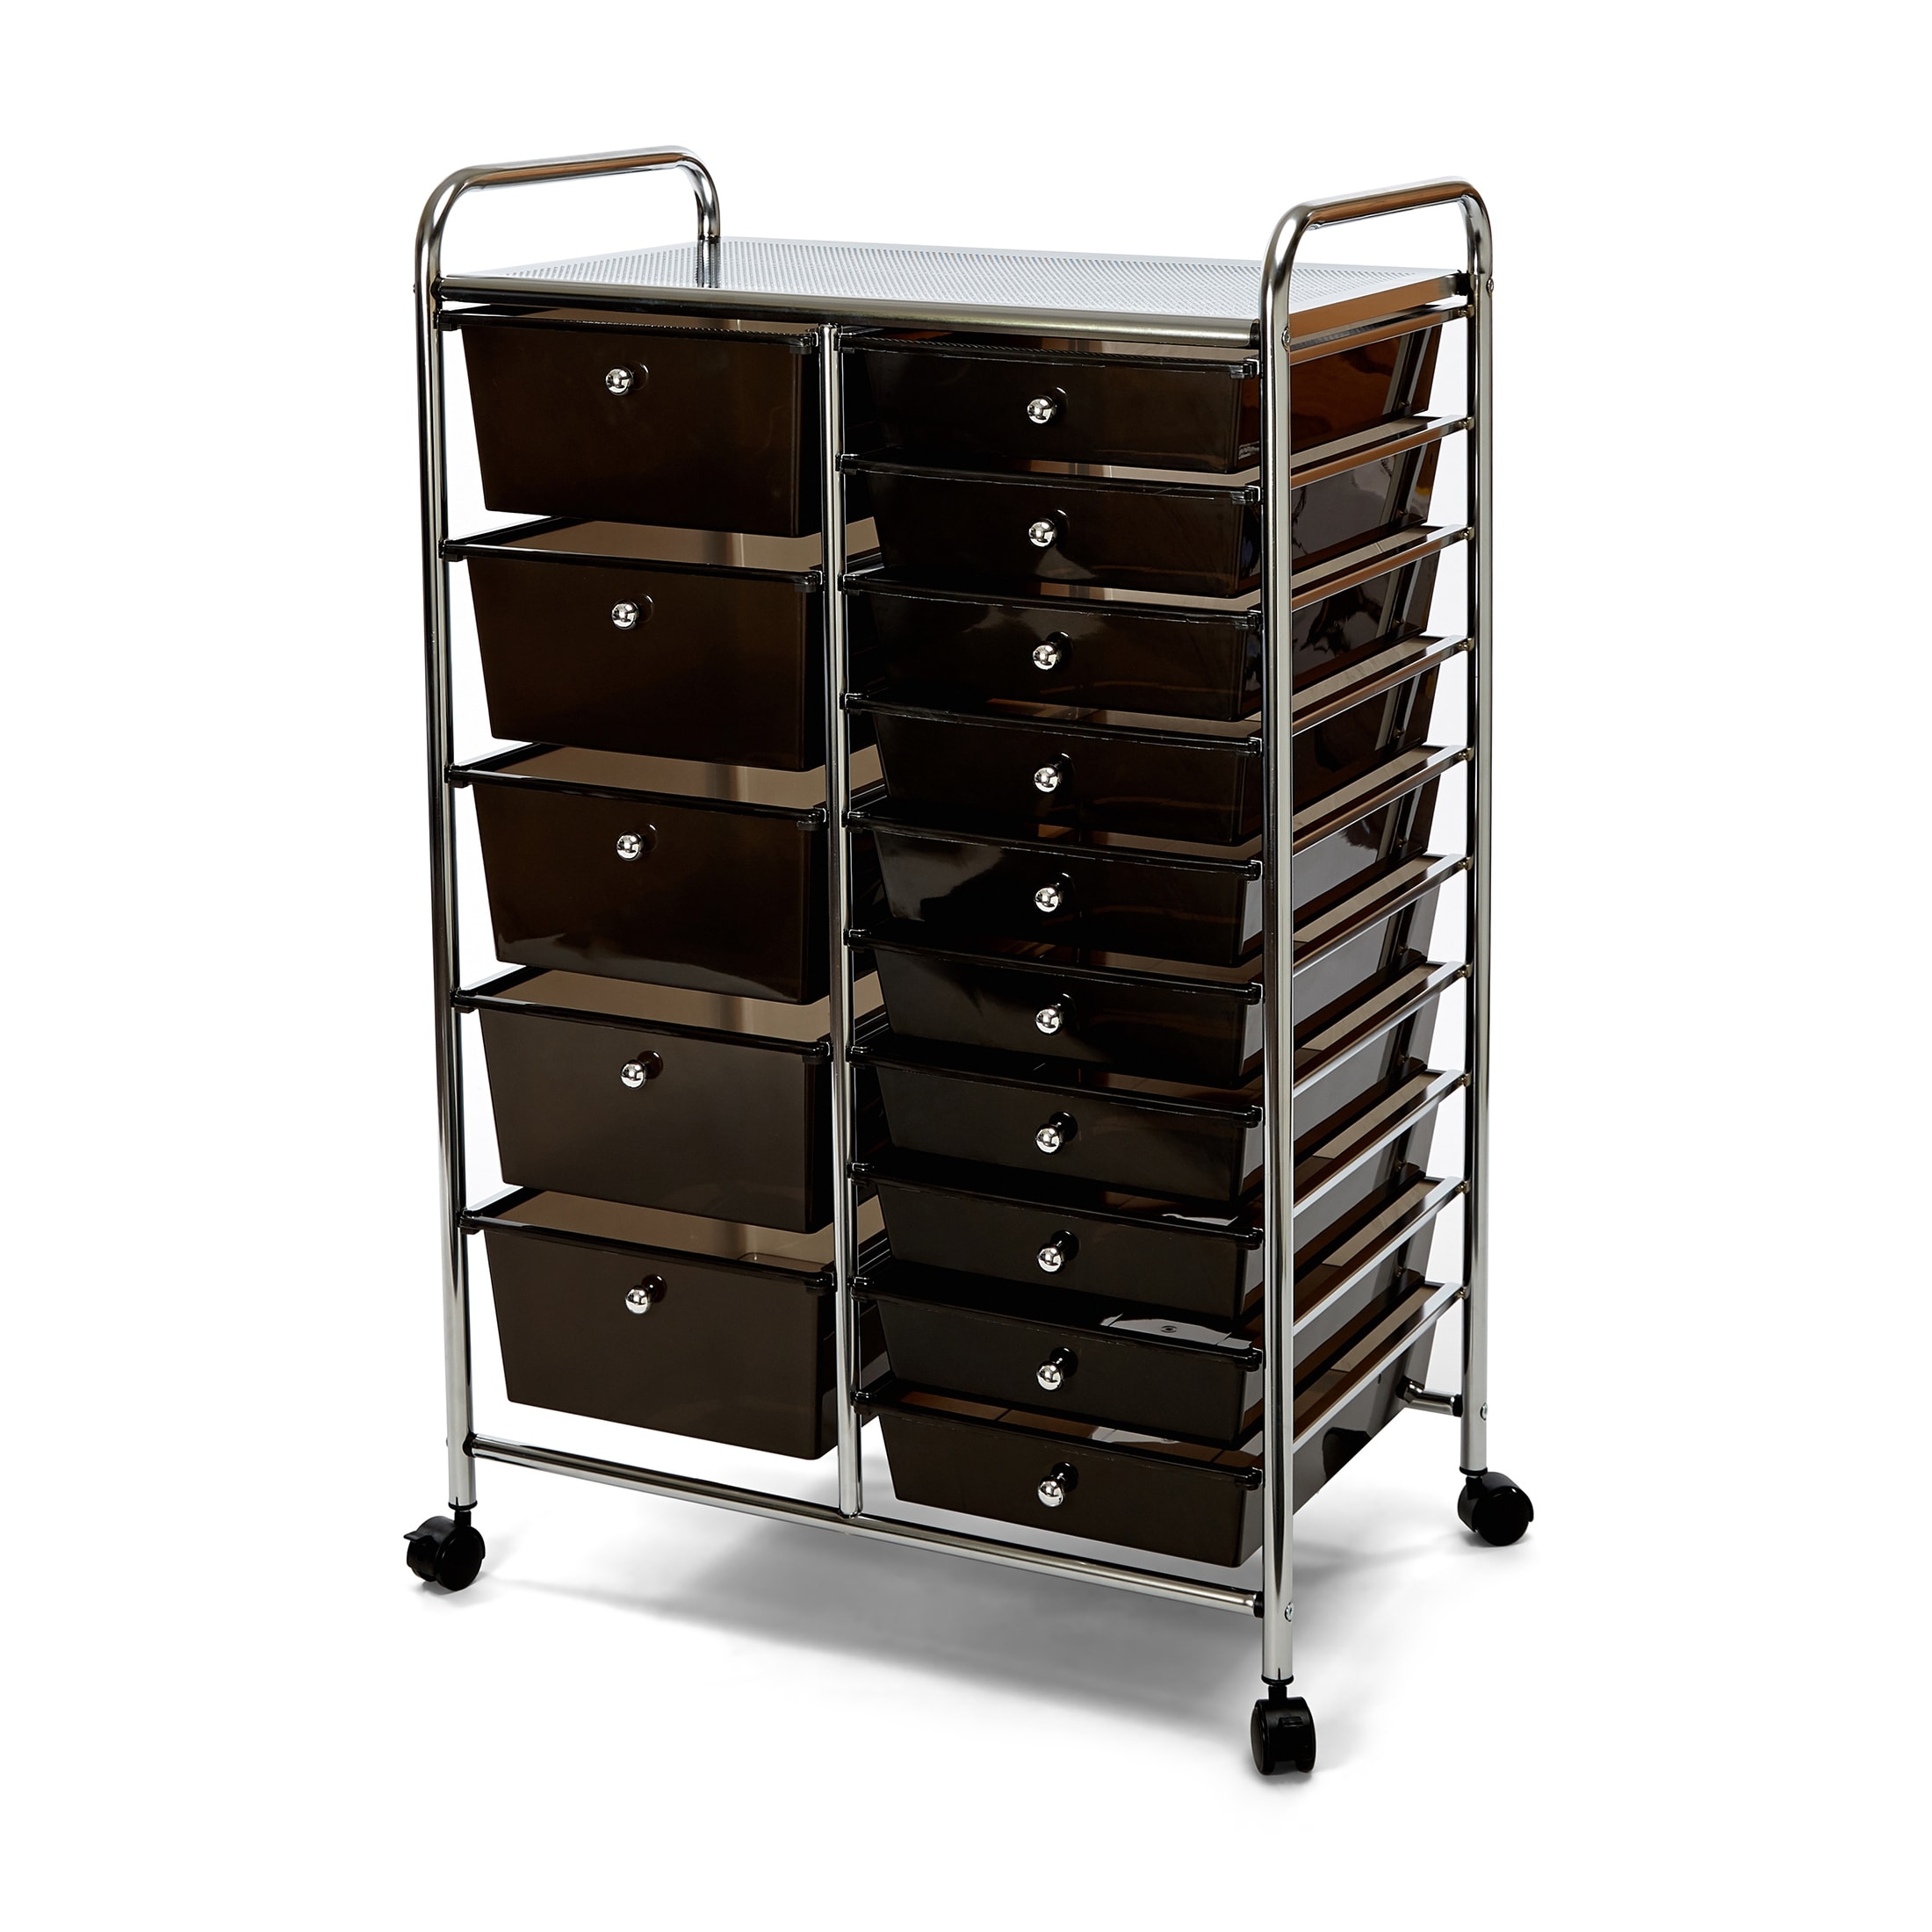 https://ak1.ostkcdn.com/images/products/is/images/direct/c077effdce36d798c759db4a290ab301009a6cbc/Seville-Classics-15-Drawer-Organizer-Cart.jpg